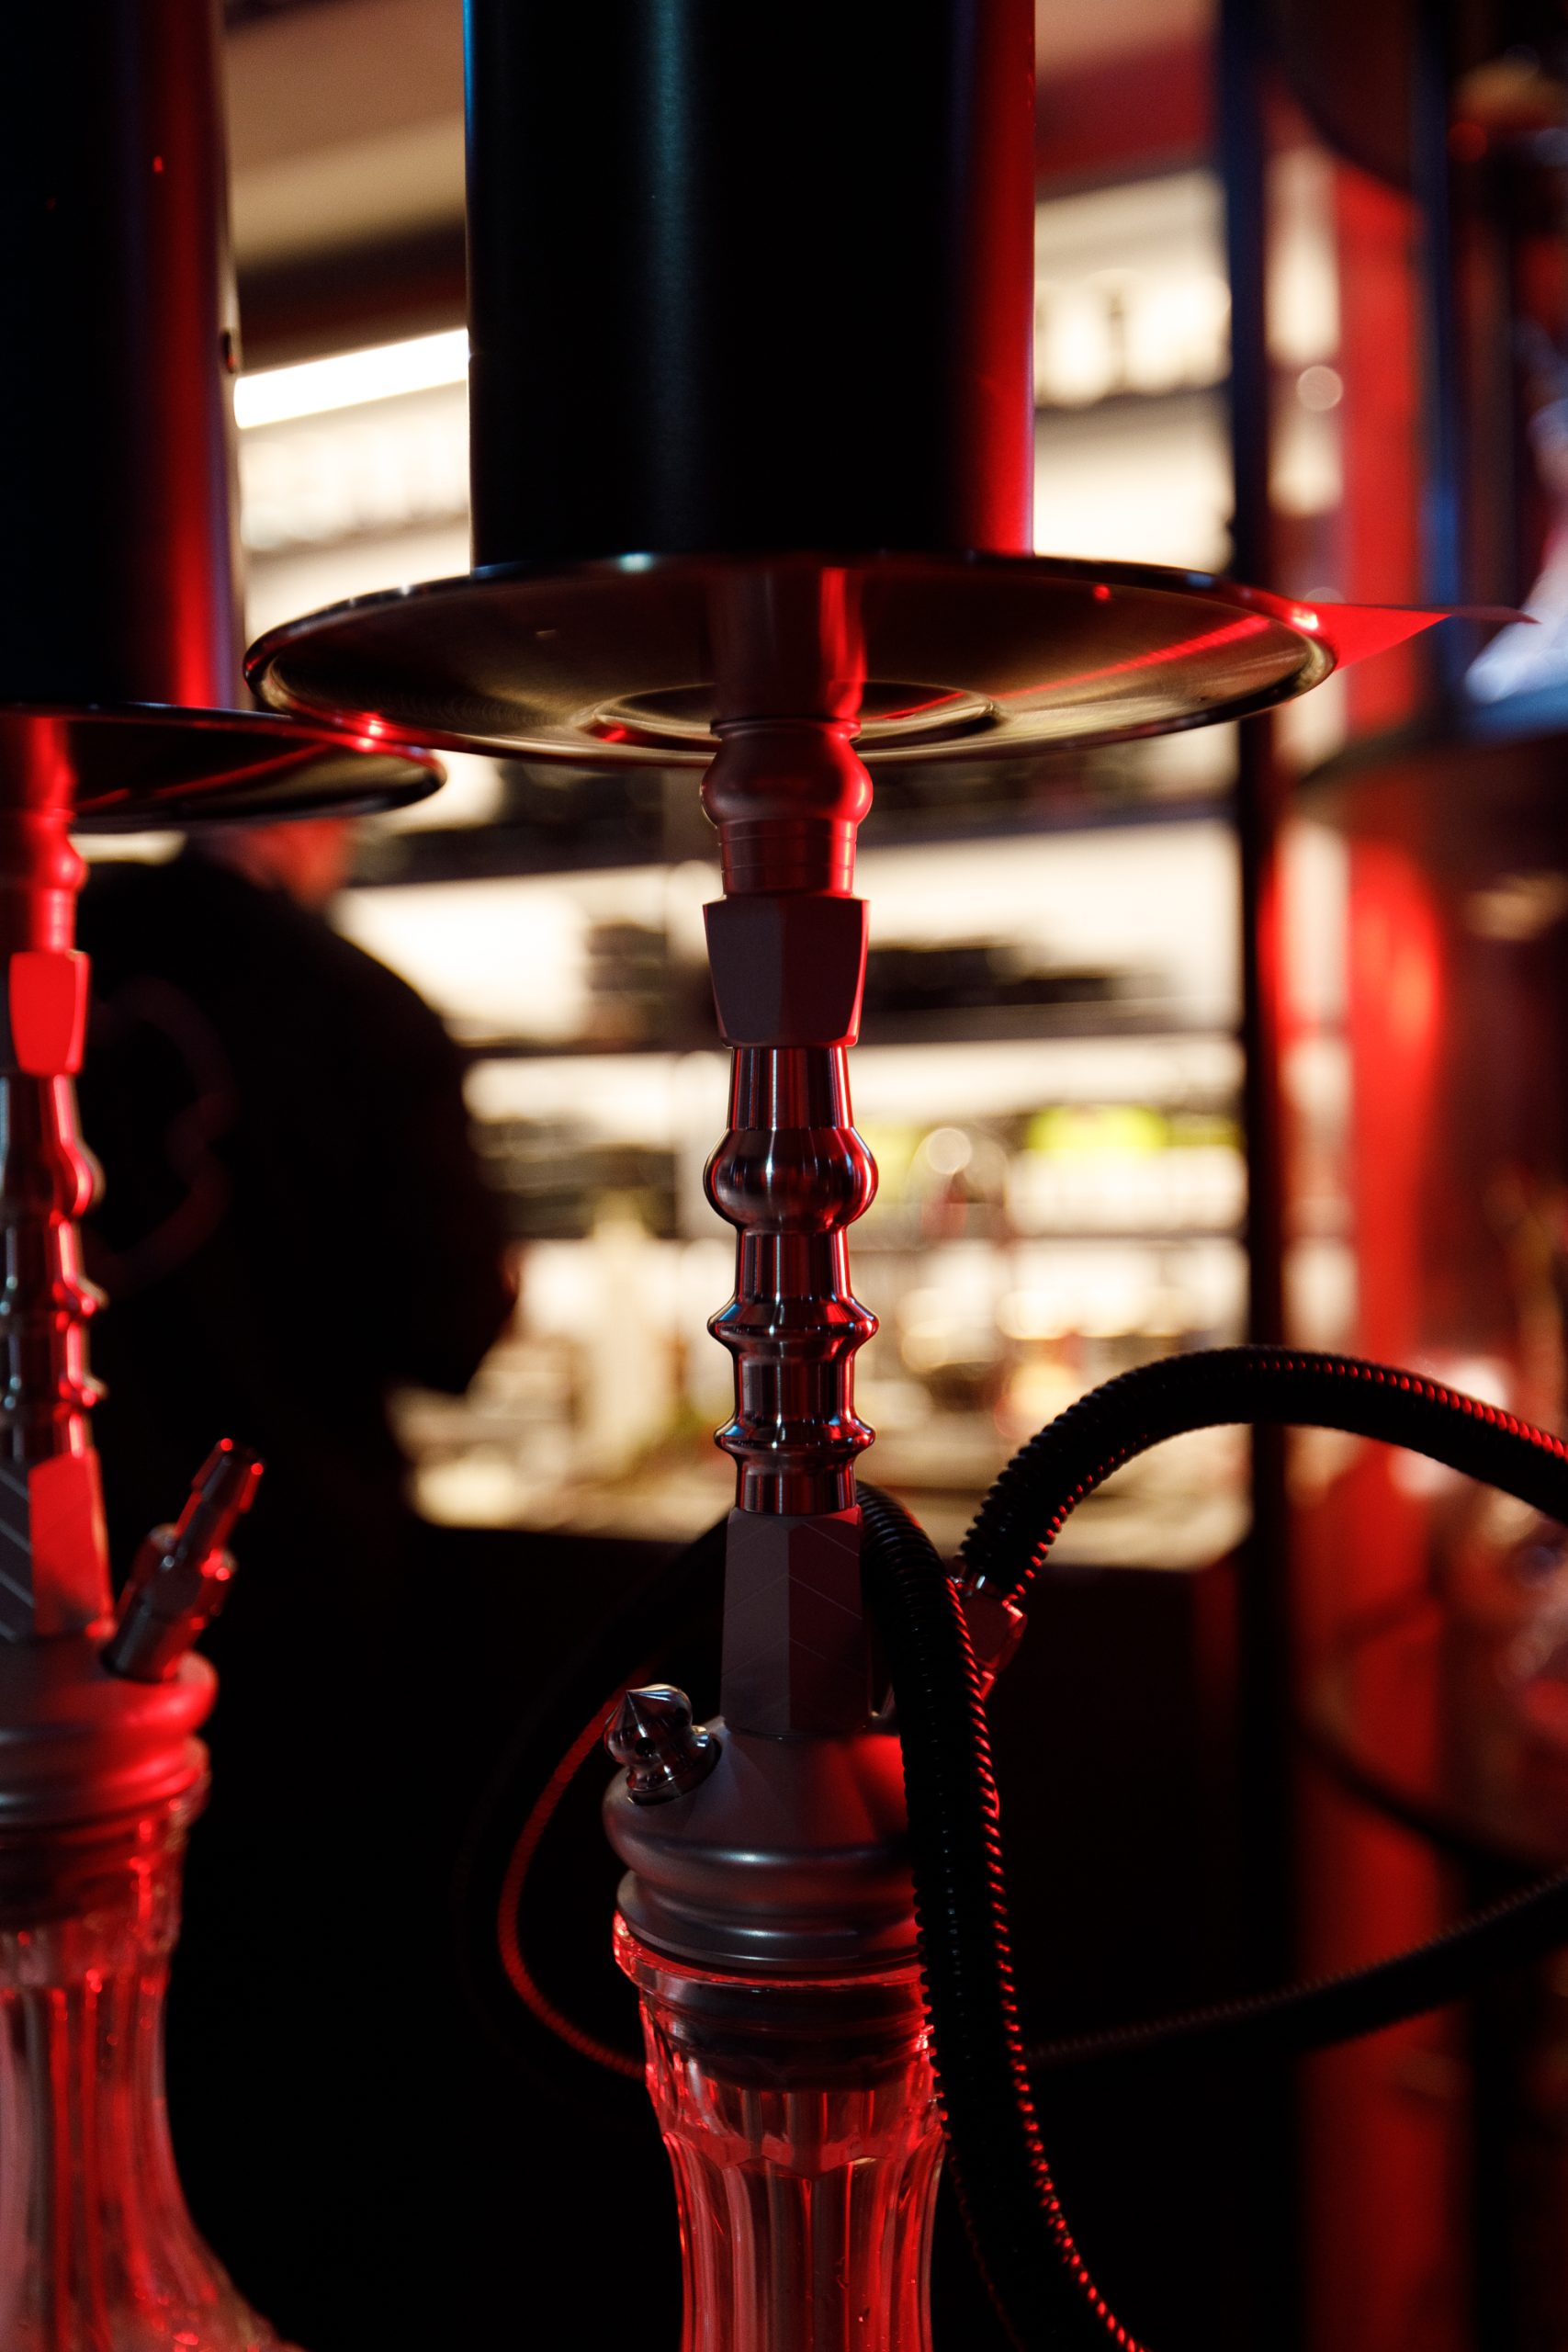 Useful Tips to Make the Most Out of Your Shisha Experience